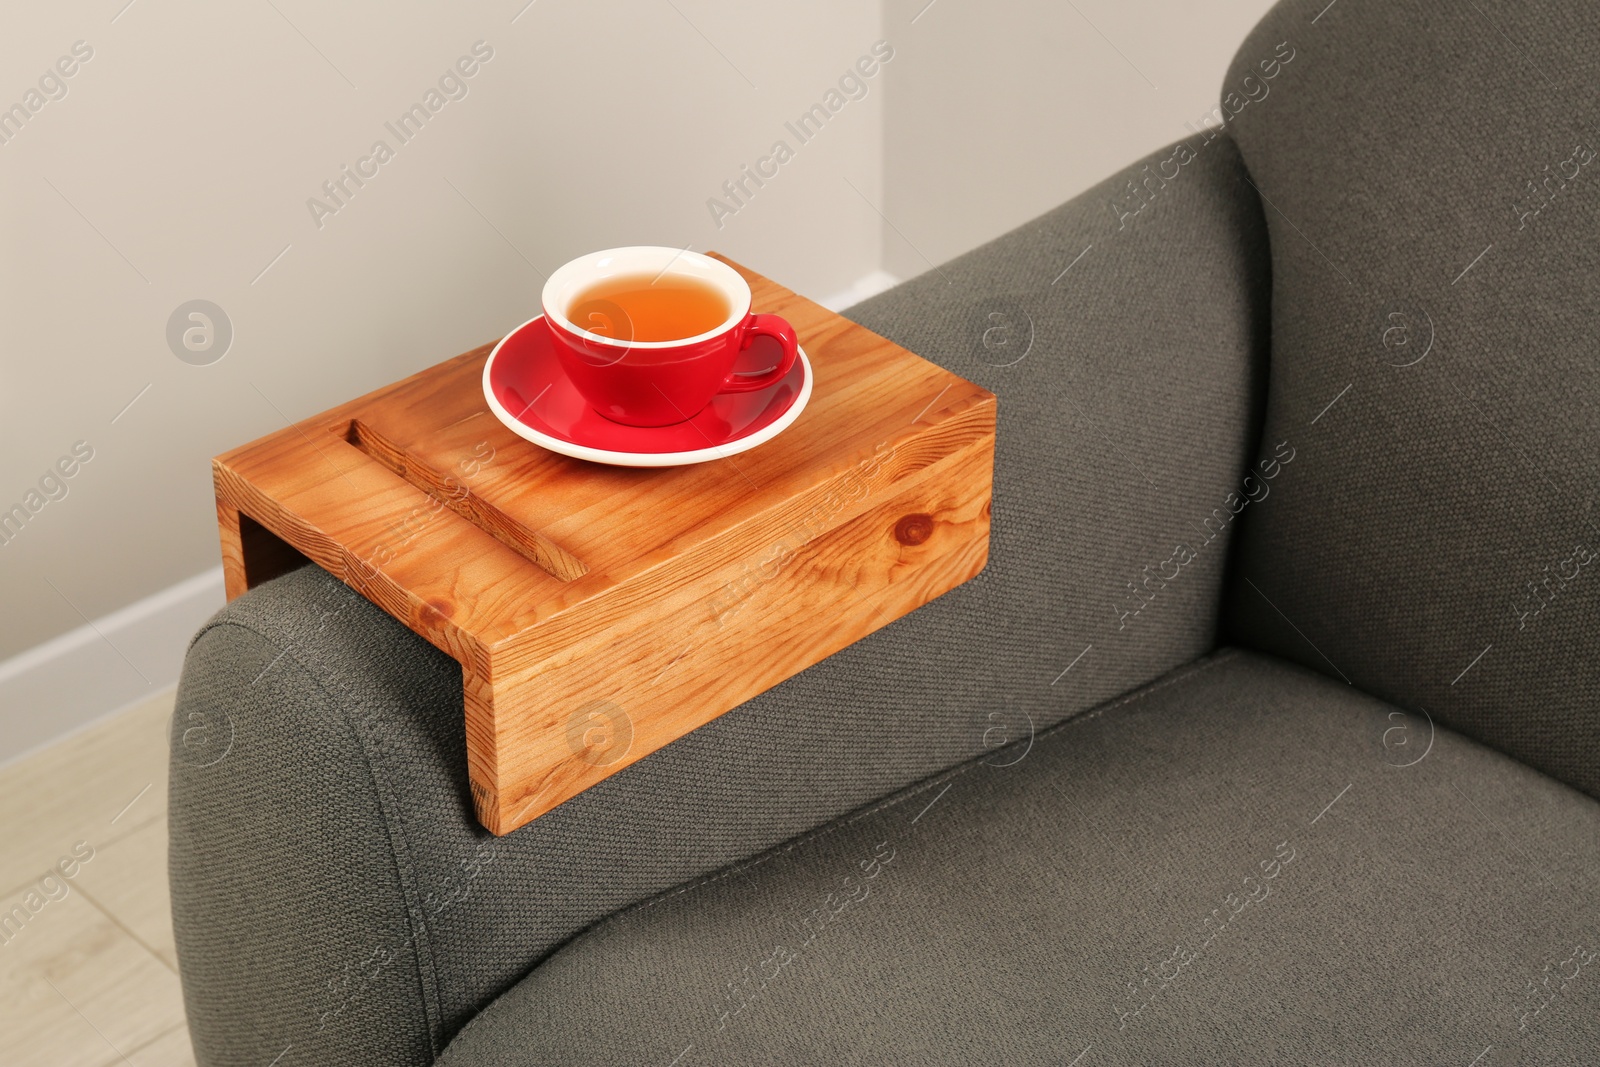 Photo of Cup of tea on sofa with wooden armrest table in room. Interior element